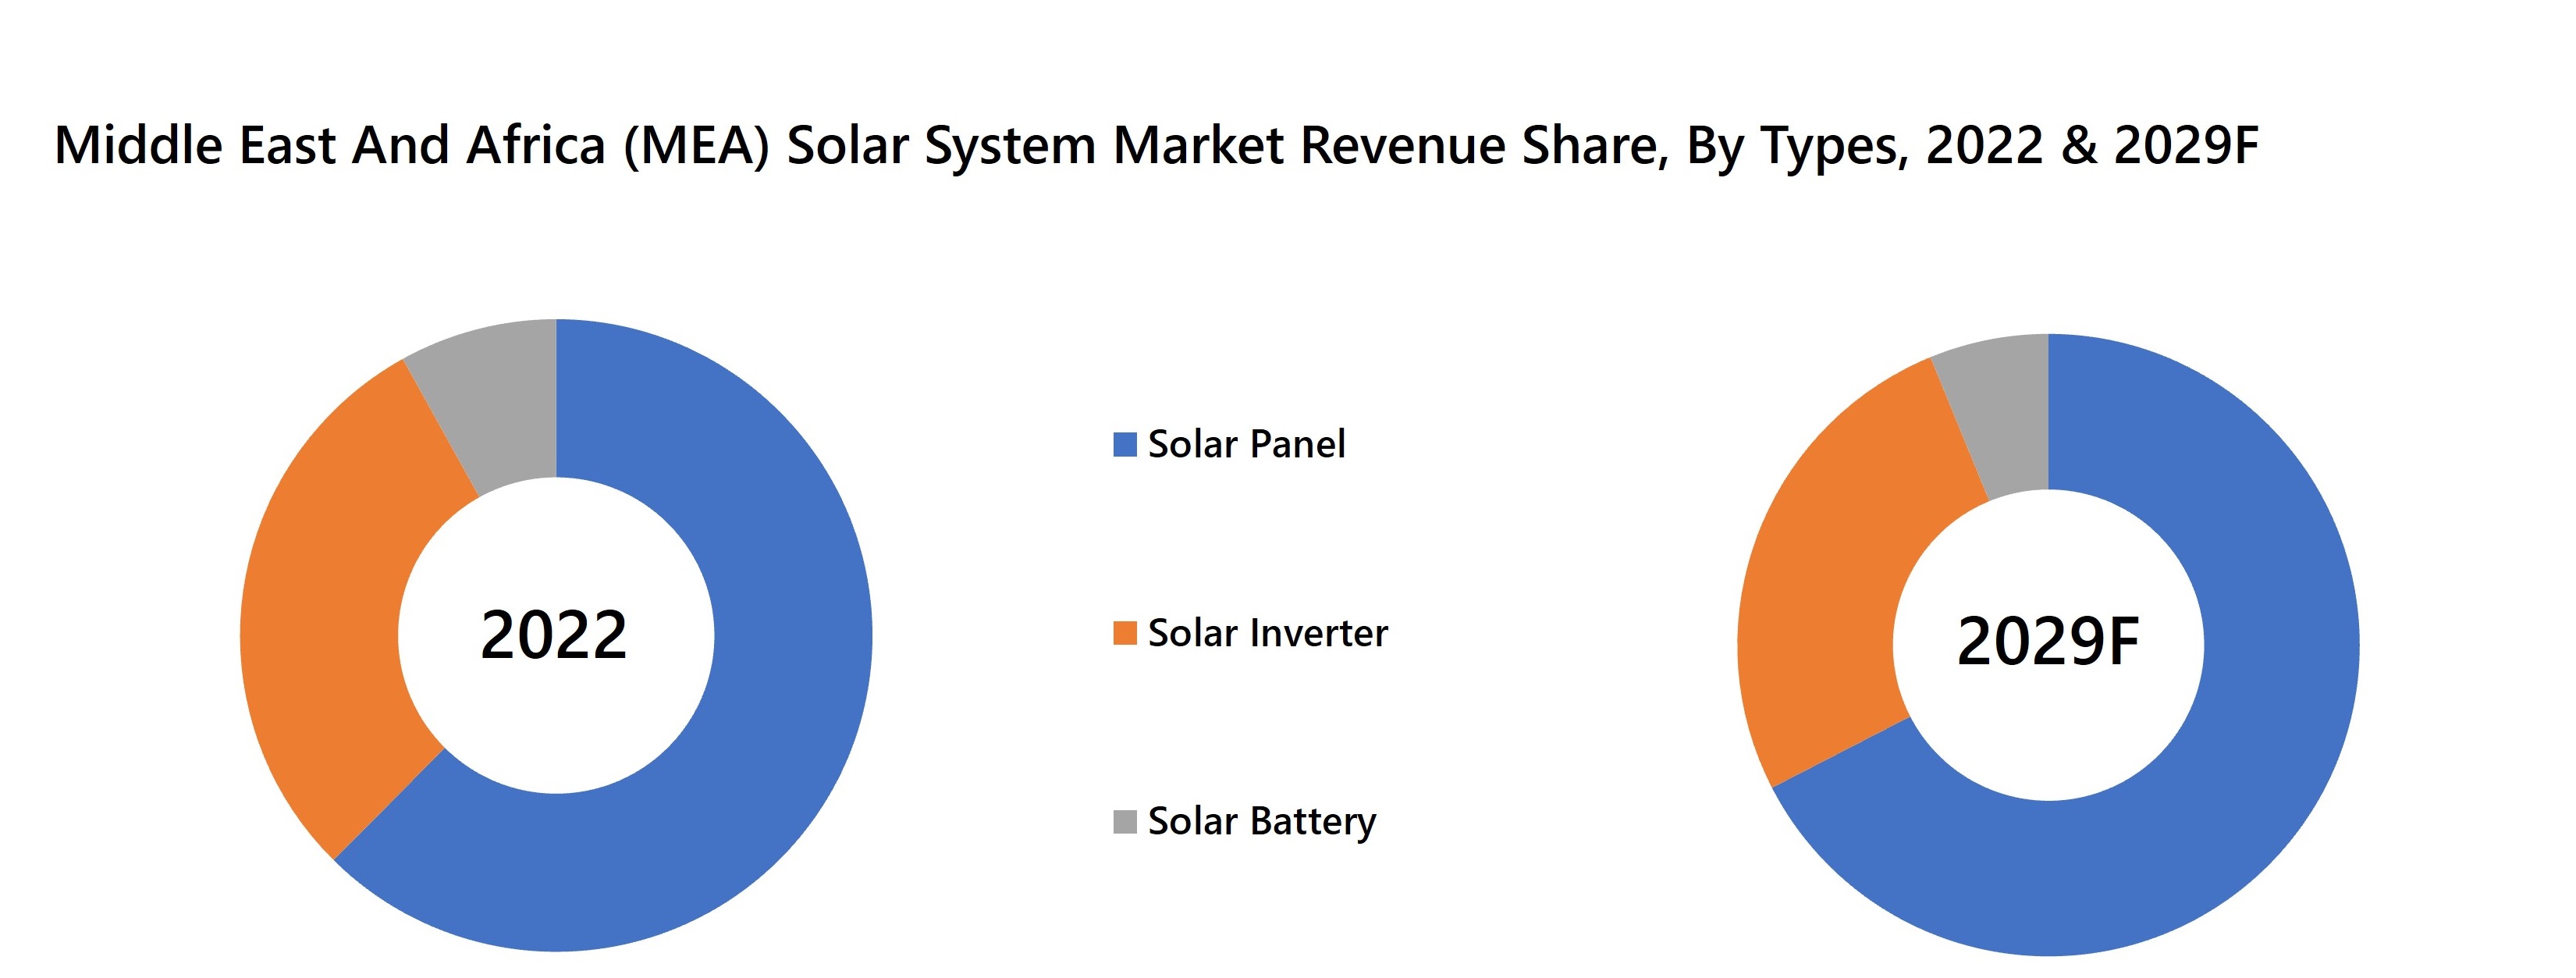 Middle East And Africa (MEA) Solar System Market Revenue Share